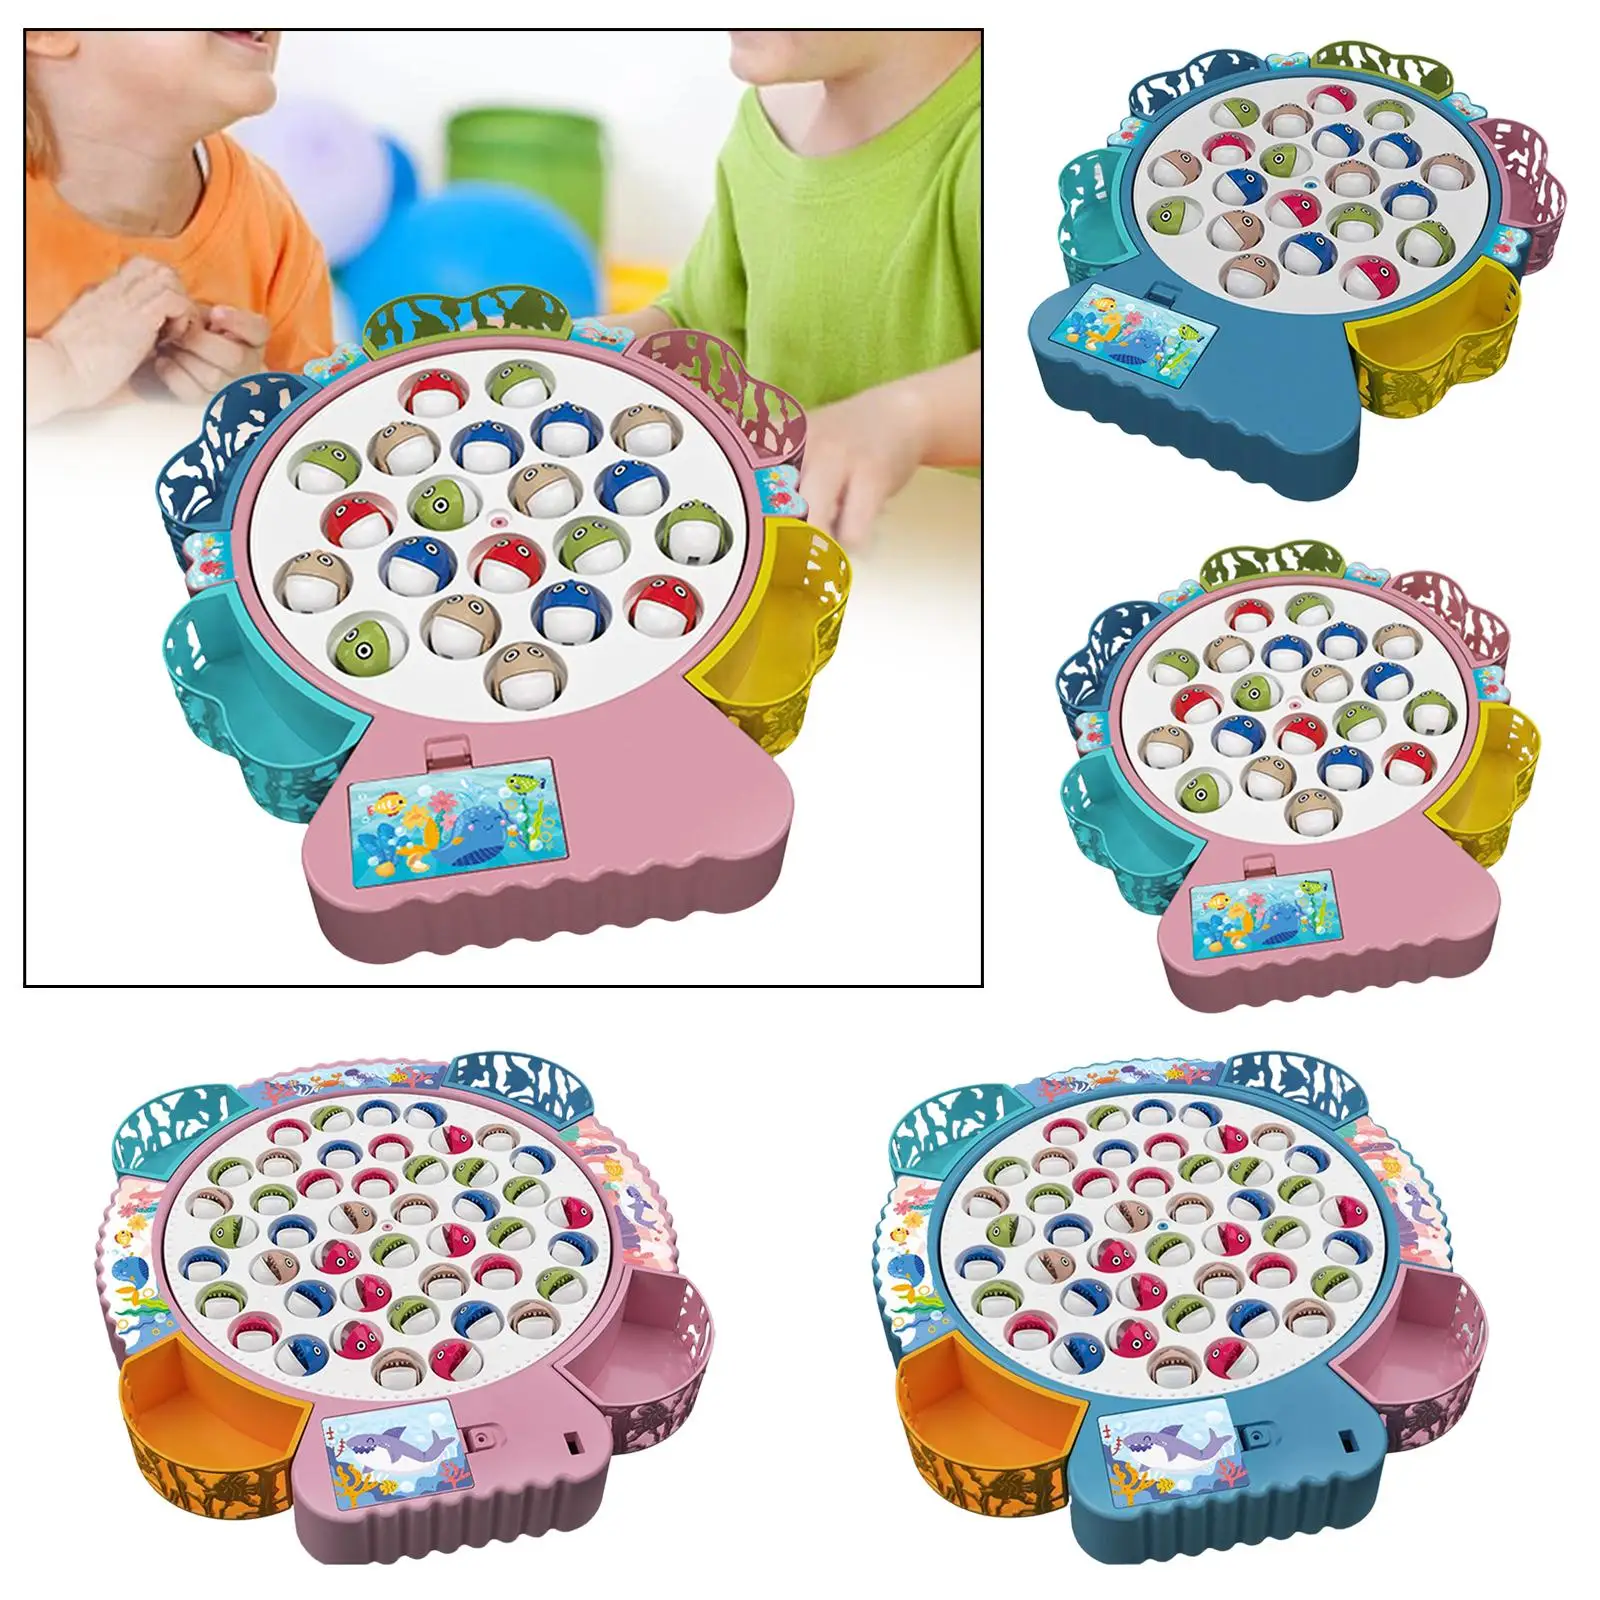 Rotating Fishing Game Board Game Learning Fine Motor Skills Electric Fishing Toy with Music for Toddlers Kids Ages 3 and up